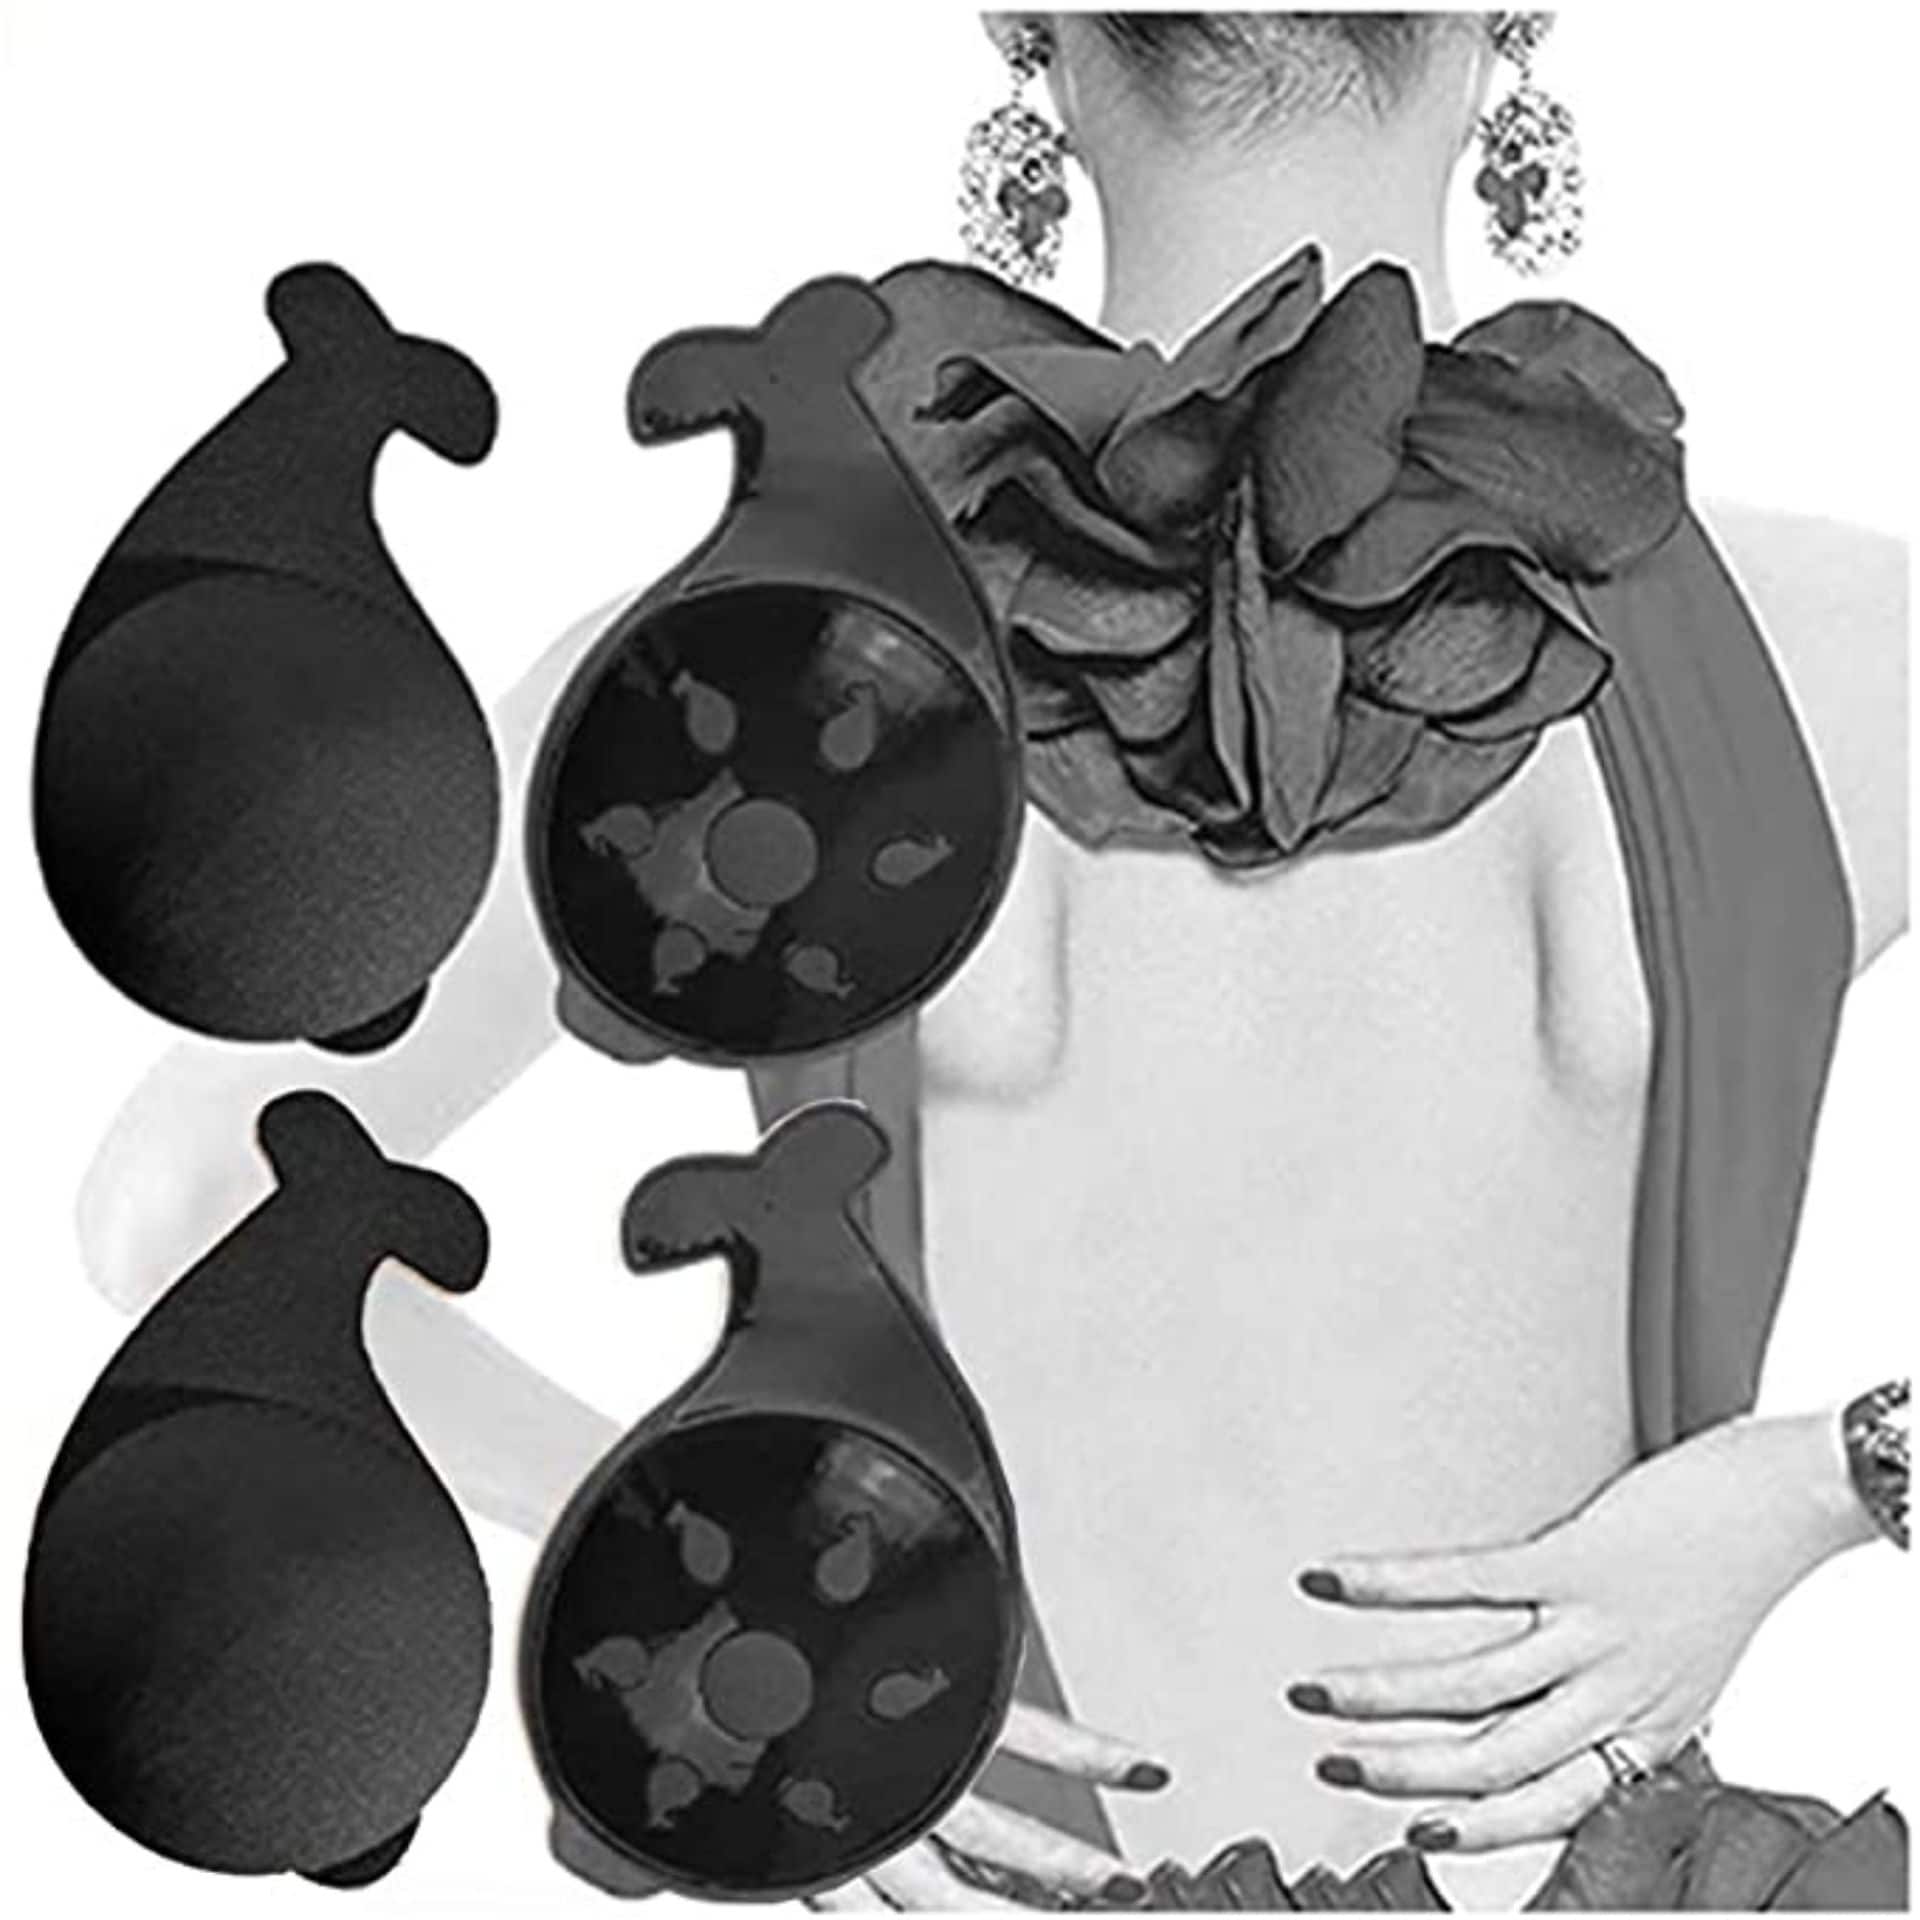 https://assets.dragonmart.ae//pictures/0423033_aqaq-dolphin-invisible-reusable-strapless-backless-bra-set-of-2pairs.jpeg